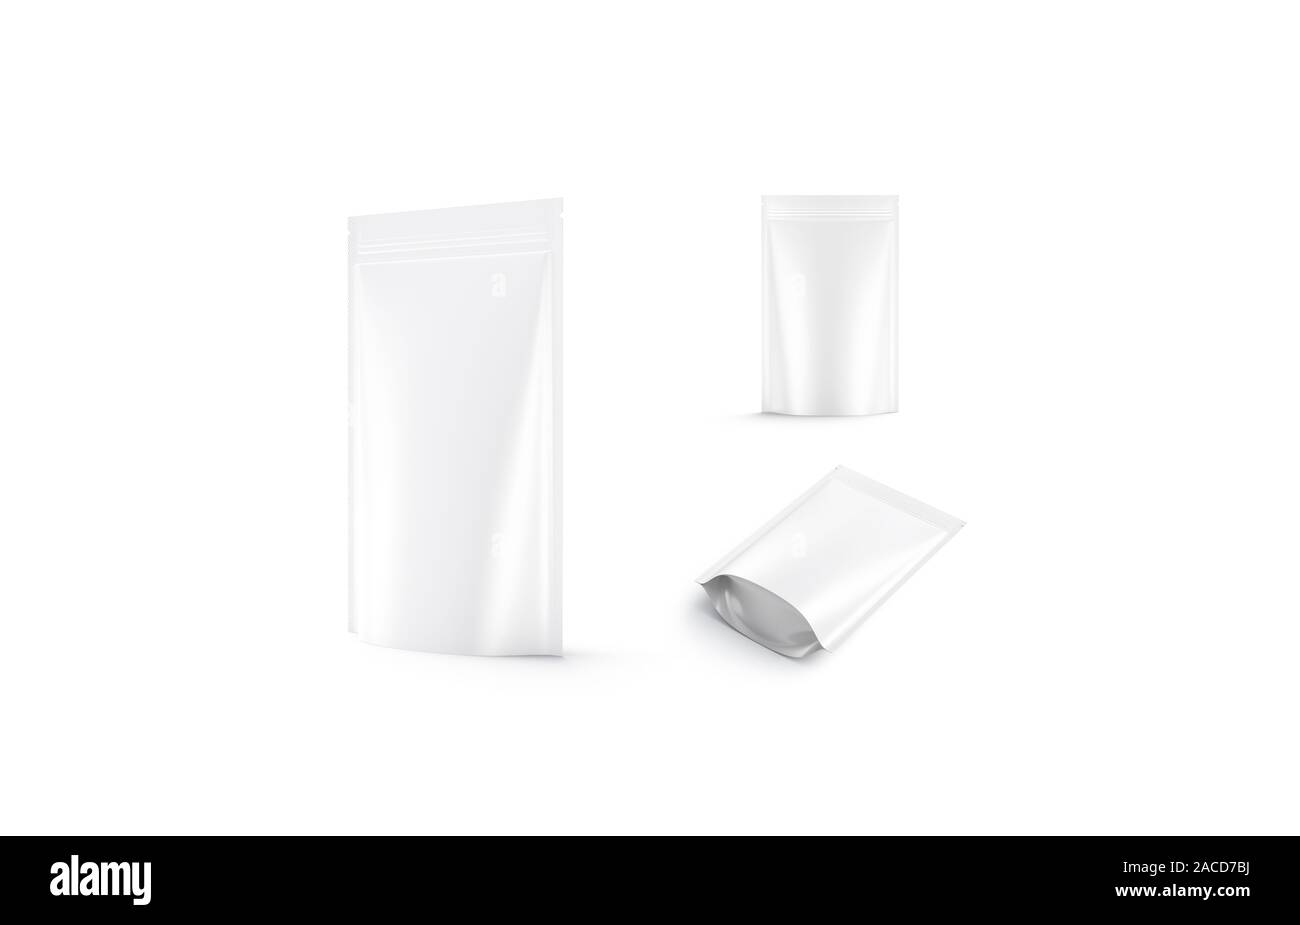 Blank blank plastic pouch mock up, different views Stock Photo